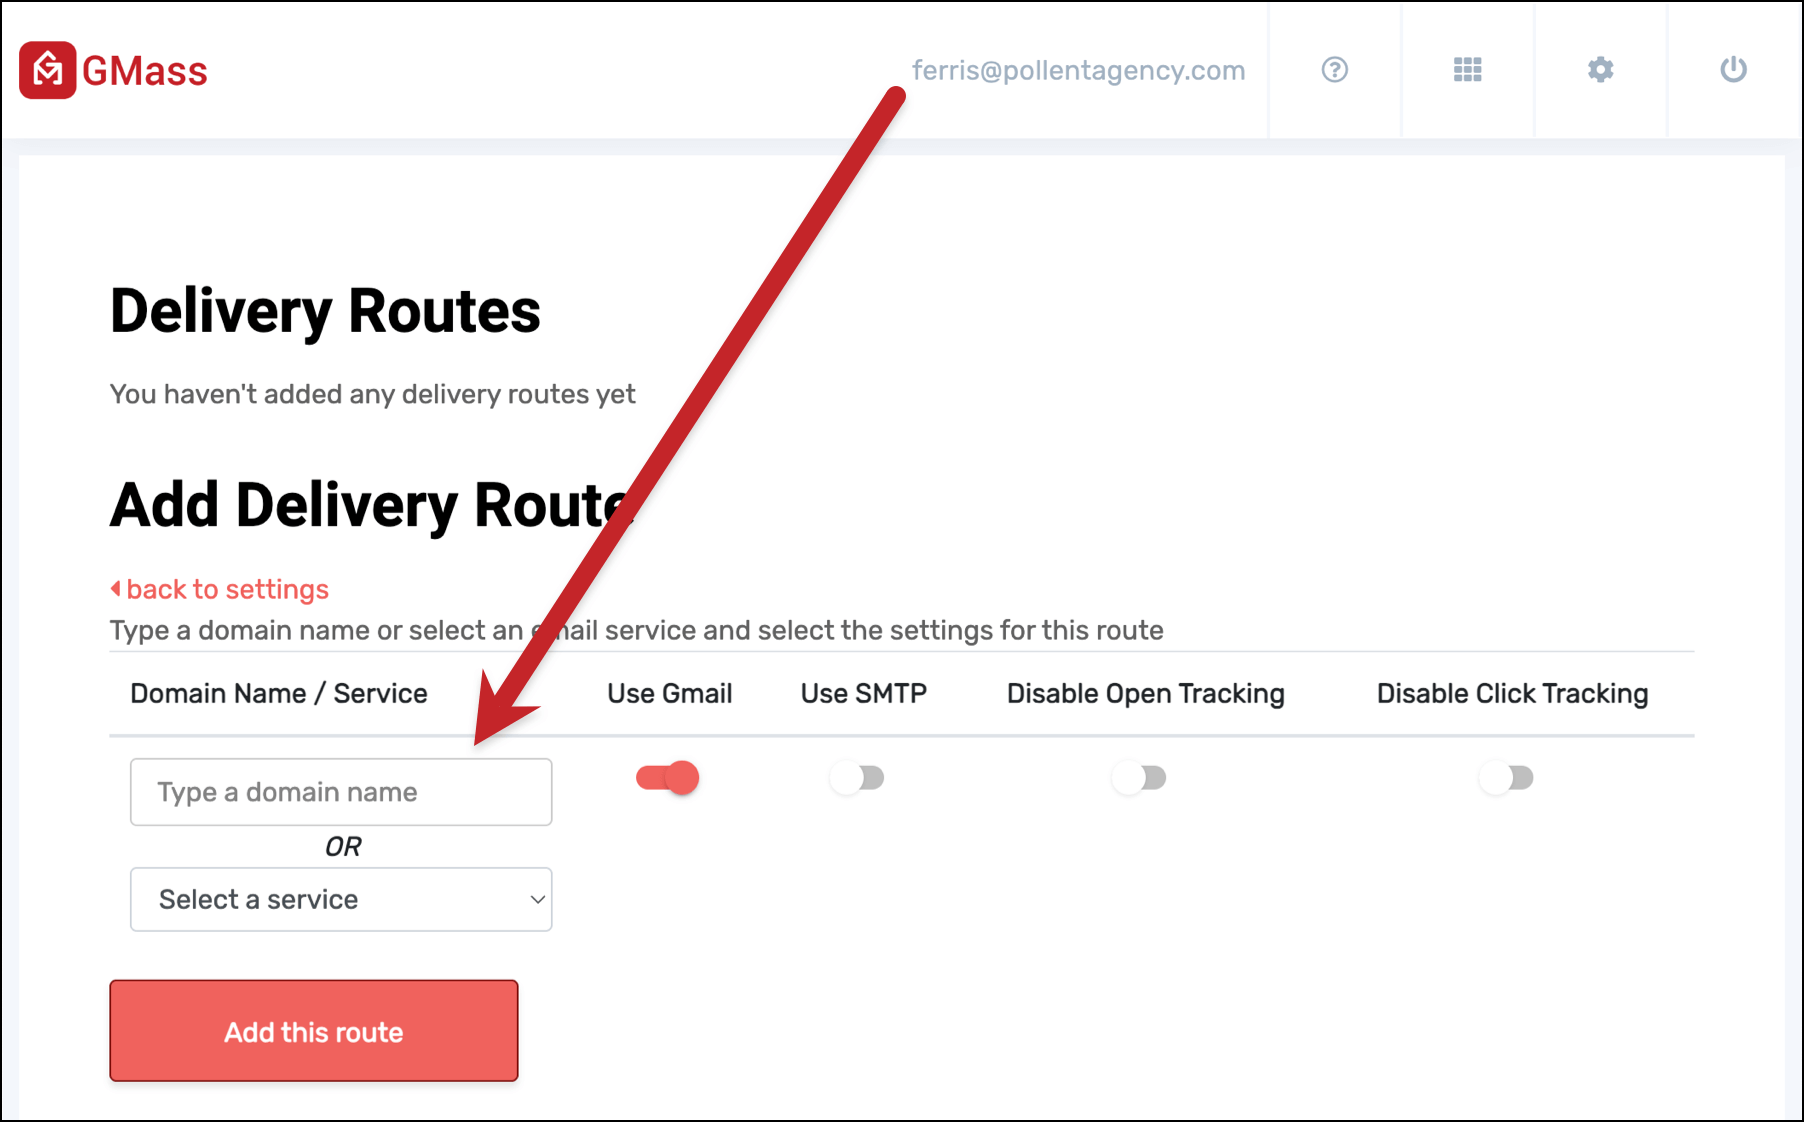 Add a new delivery route